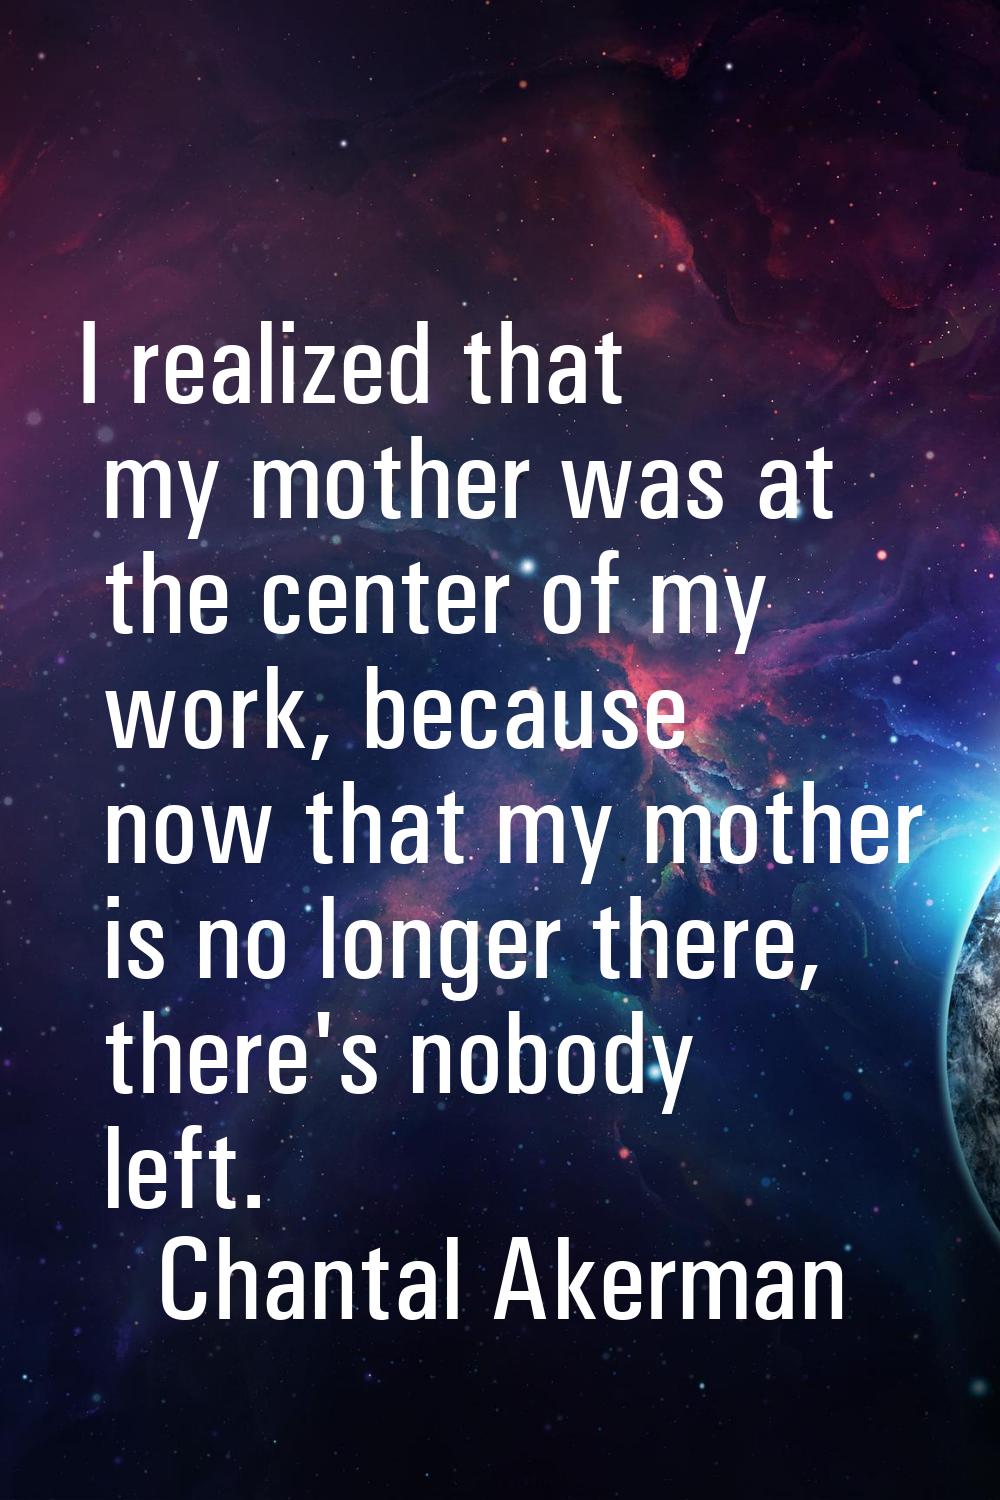 I realized that my mother was at the center of my work, because now that my mother is no longer the